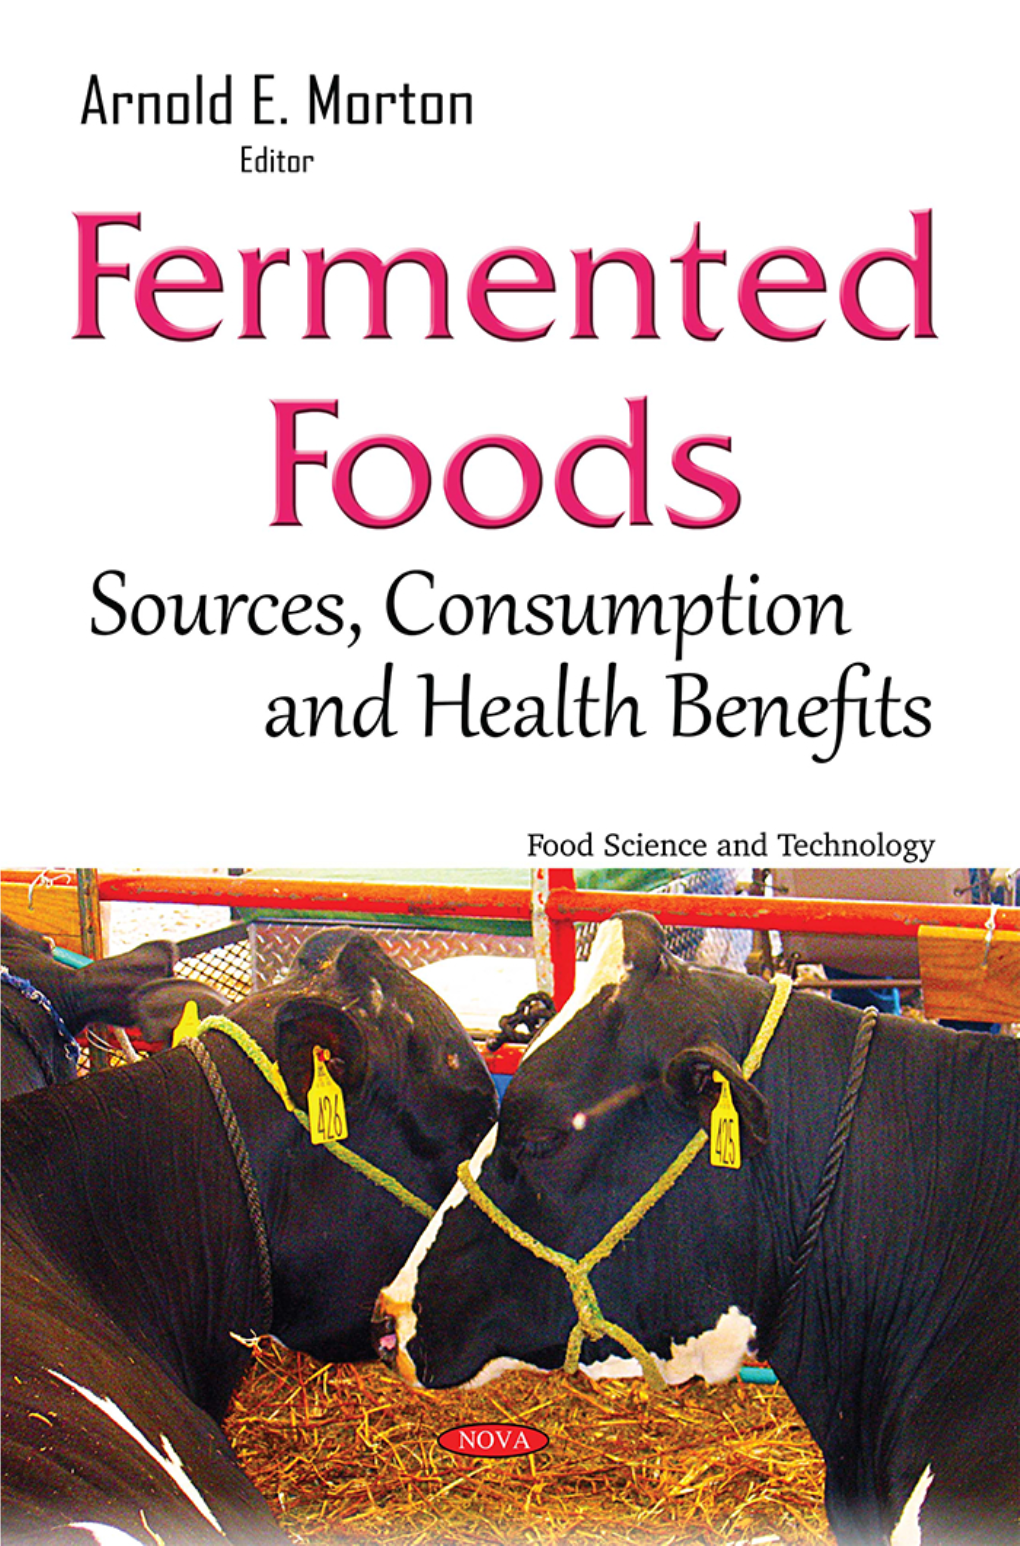 Fermented Foods: Sources, Consumption and Health Benefits